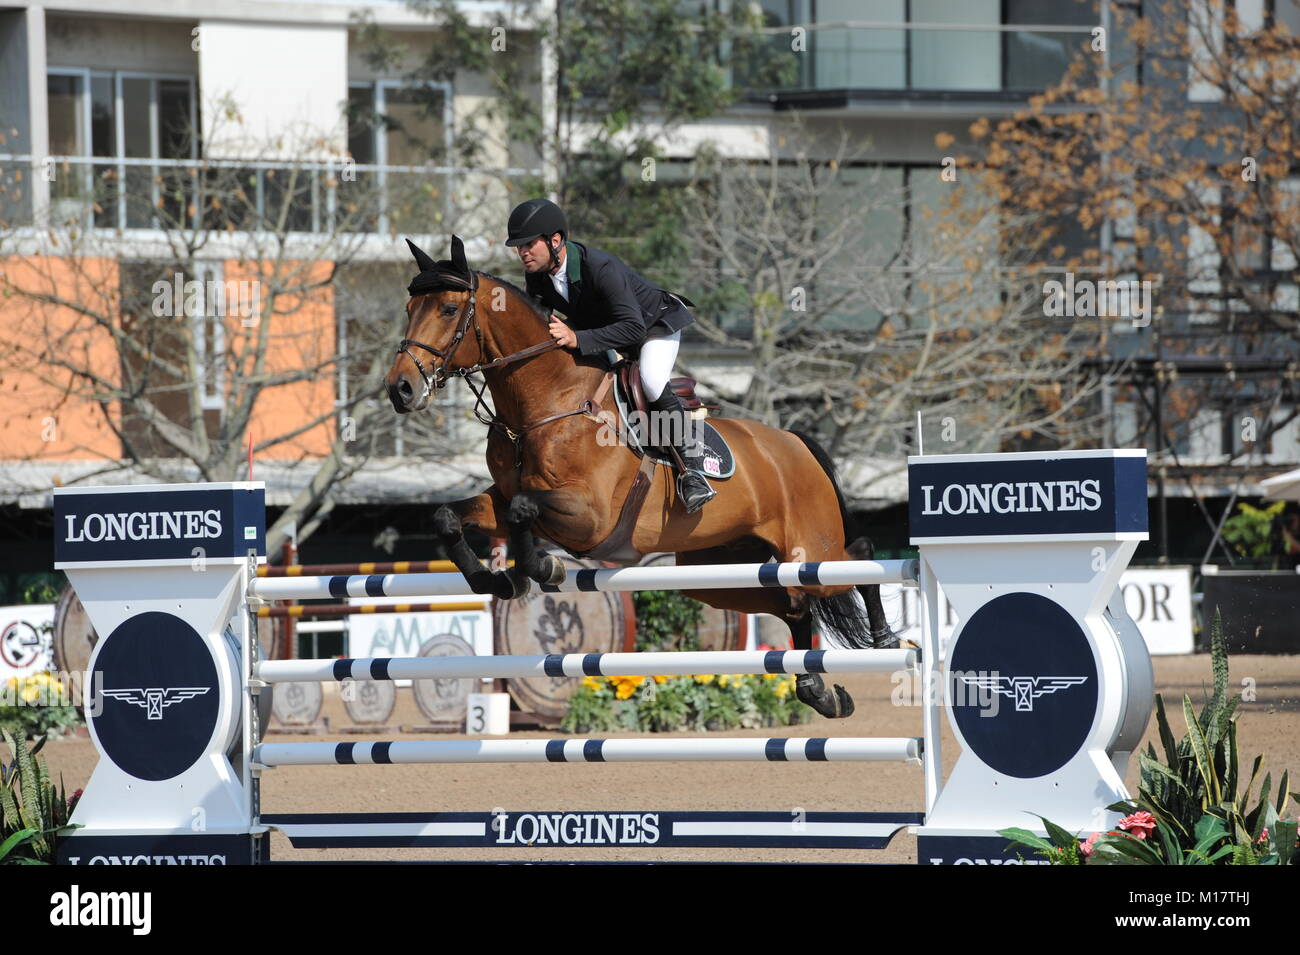 Guadalajara, Jalisco, Mexico. 27th January, 2018. CSI 4*, Longines World Cup, Guillermo Williams (MEX) riding Magallanes,. Credit: Peter Lewellyn/Alamy News Stock Photo